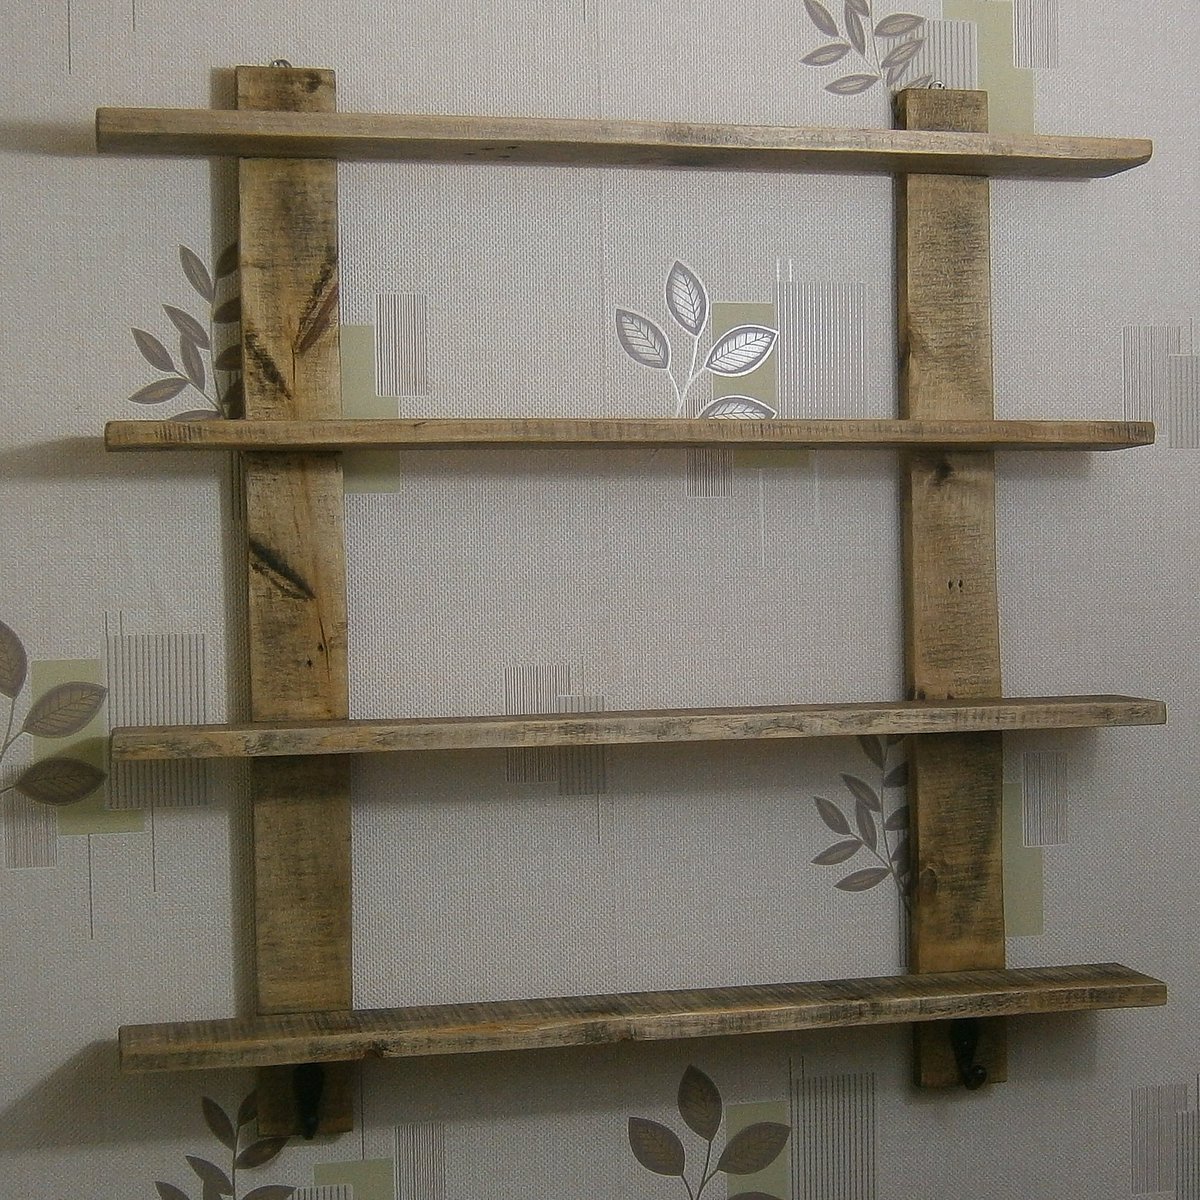 Rustic shelving units available with 1, 2, 3 and 4 shelves #rusticshelving #recycledpallets #handmade #industrialfurniture #solidwood